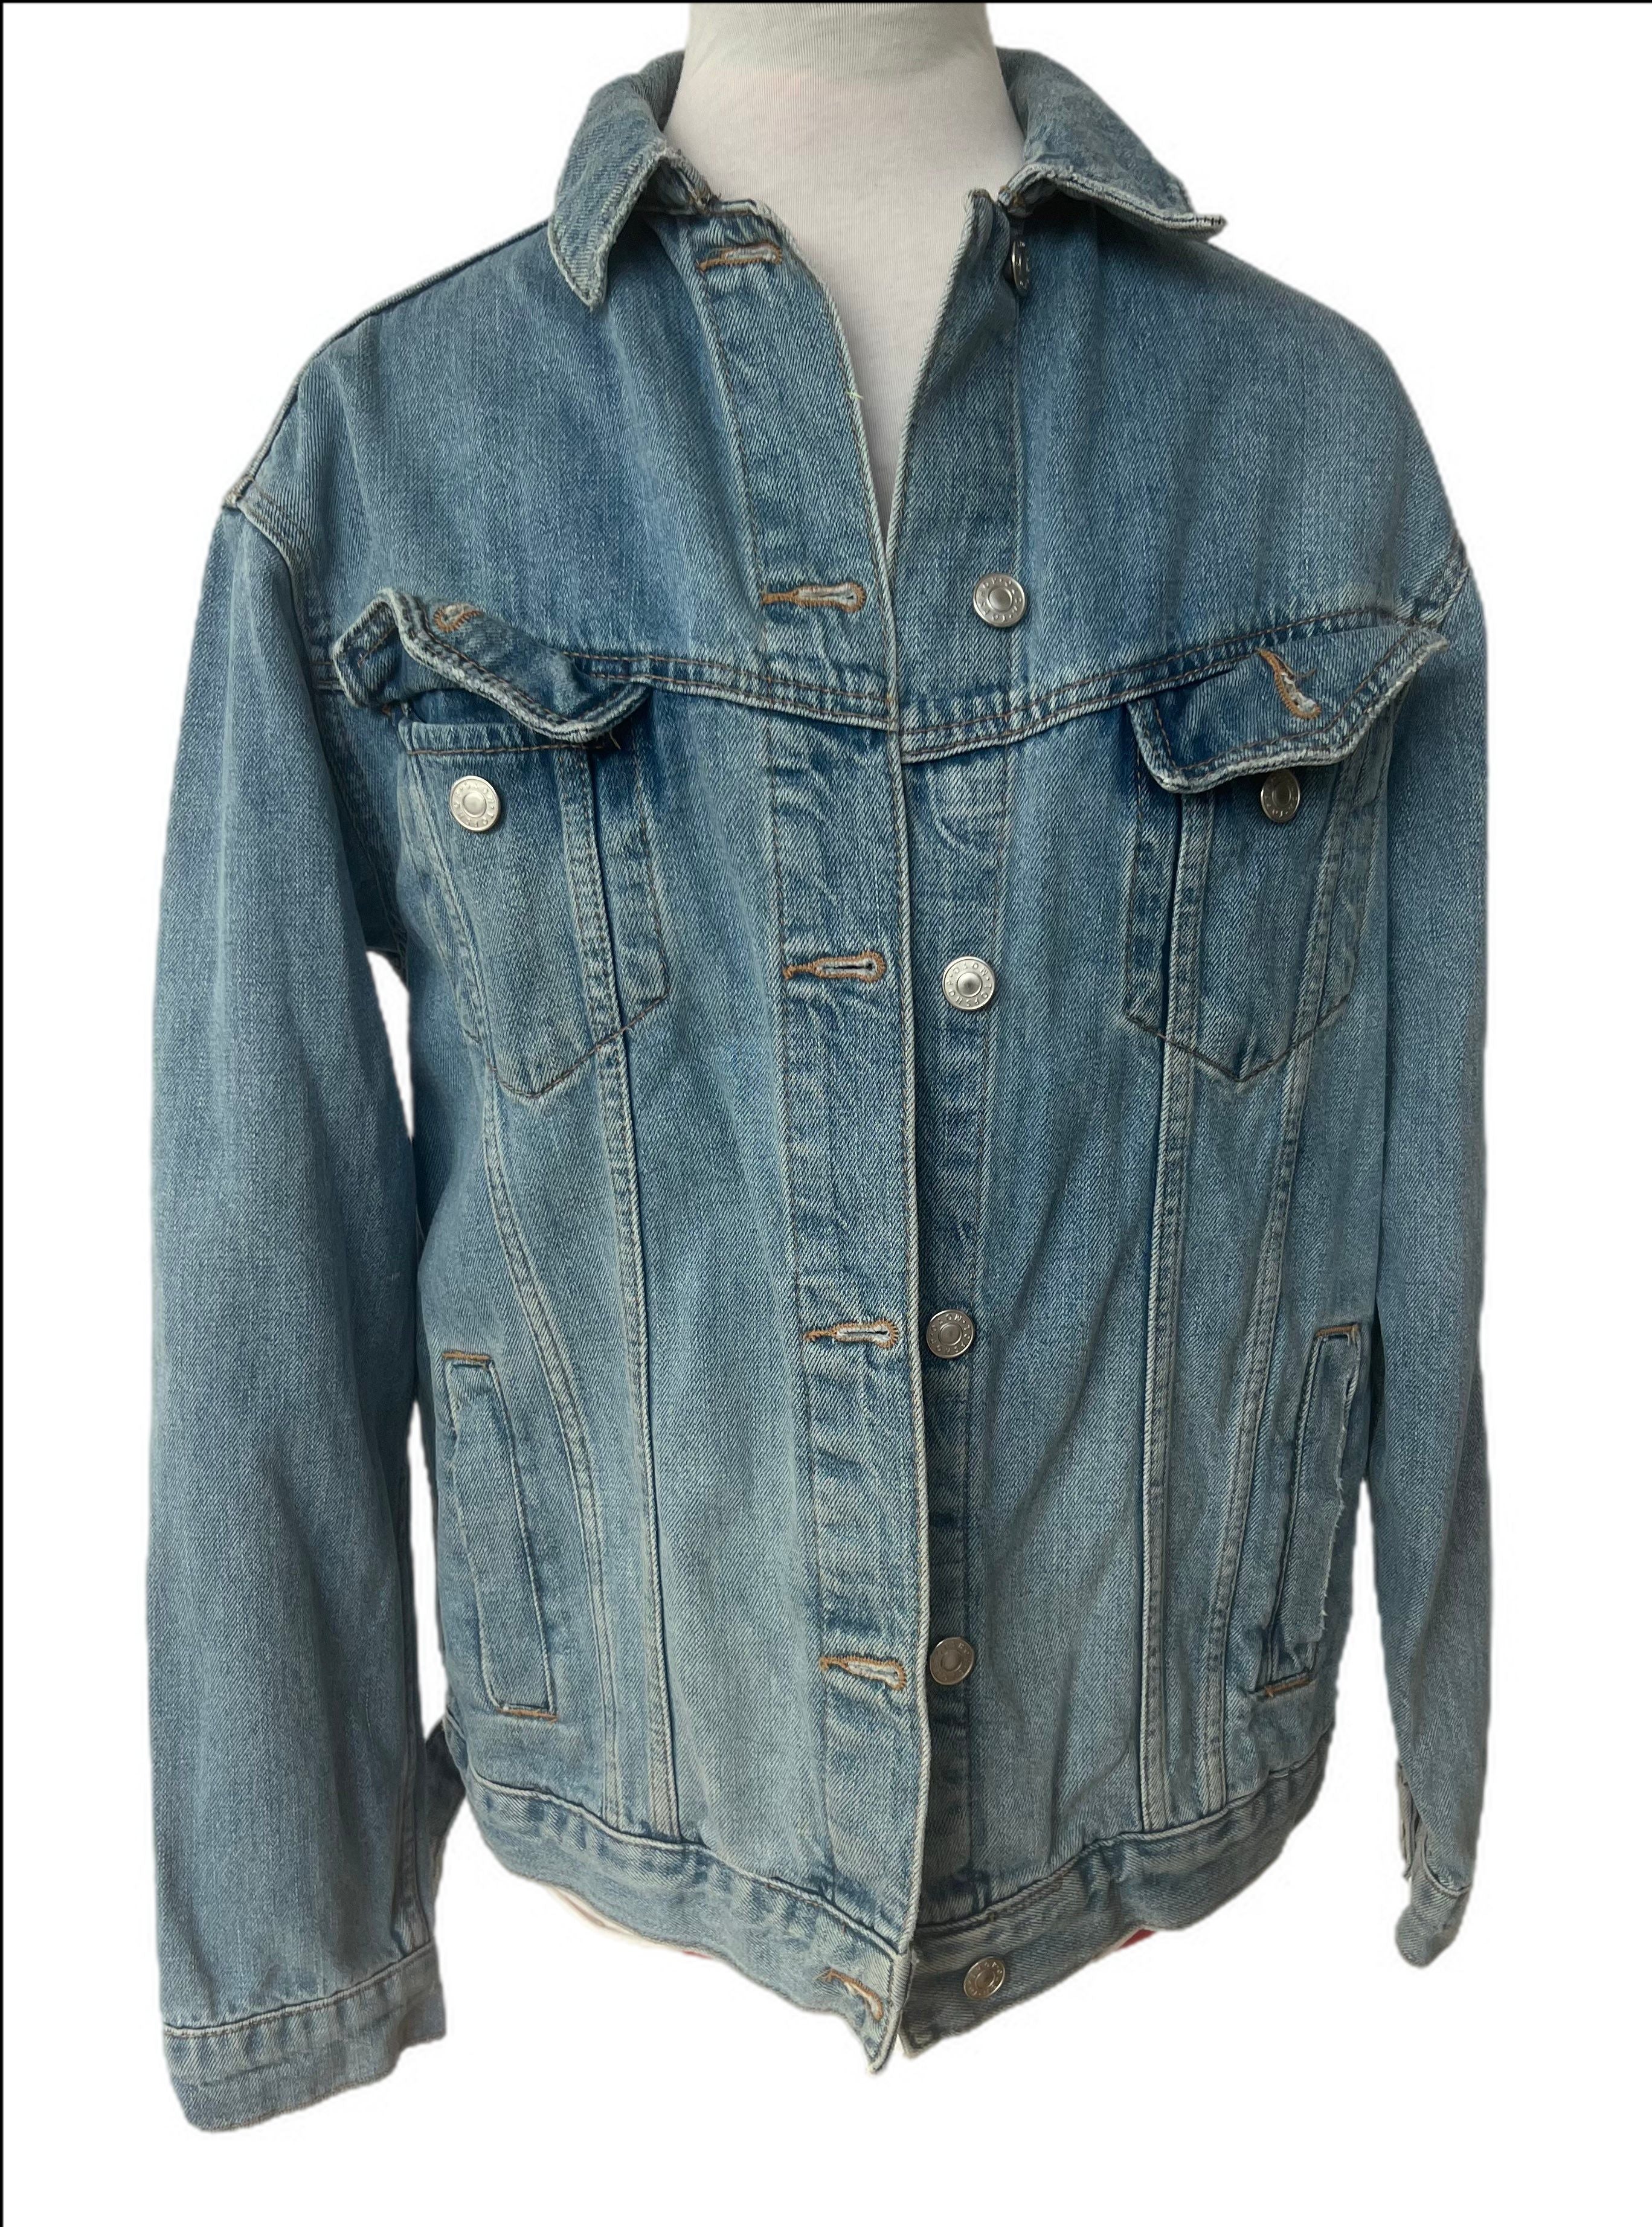 Women's Mossimo Denim Jean Jacket - clothing & accessories - by owner -  apparel sale - craigslist